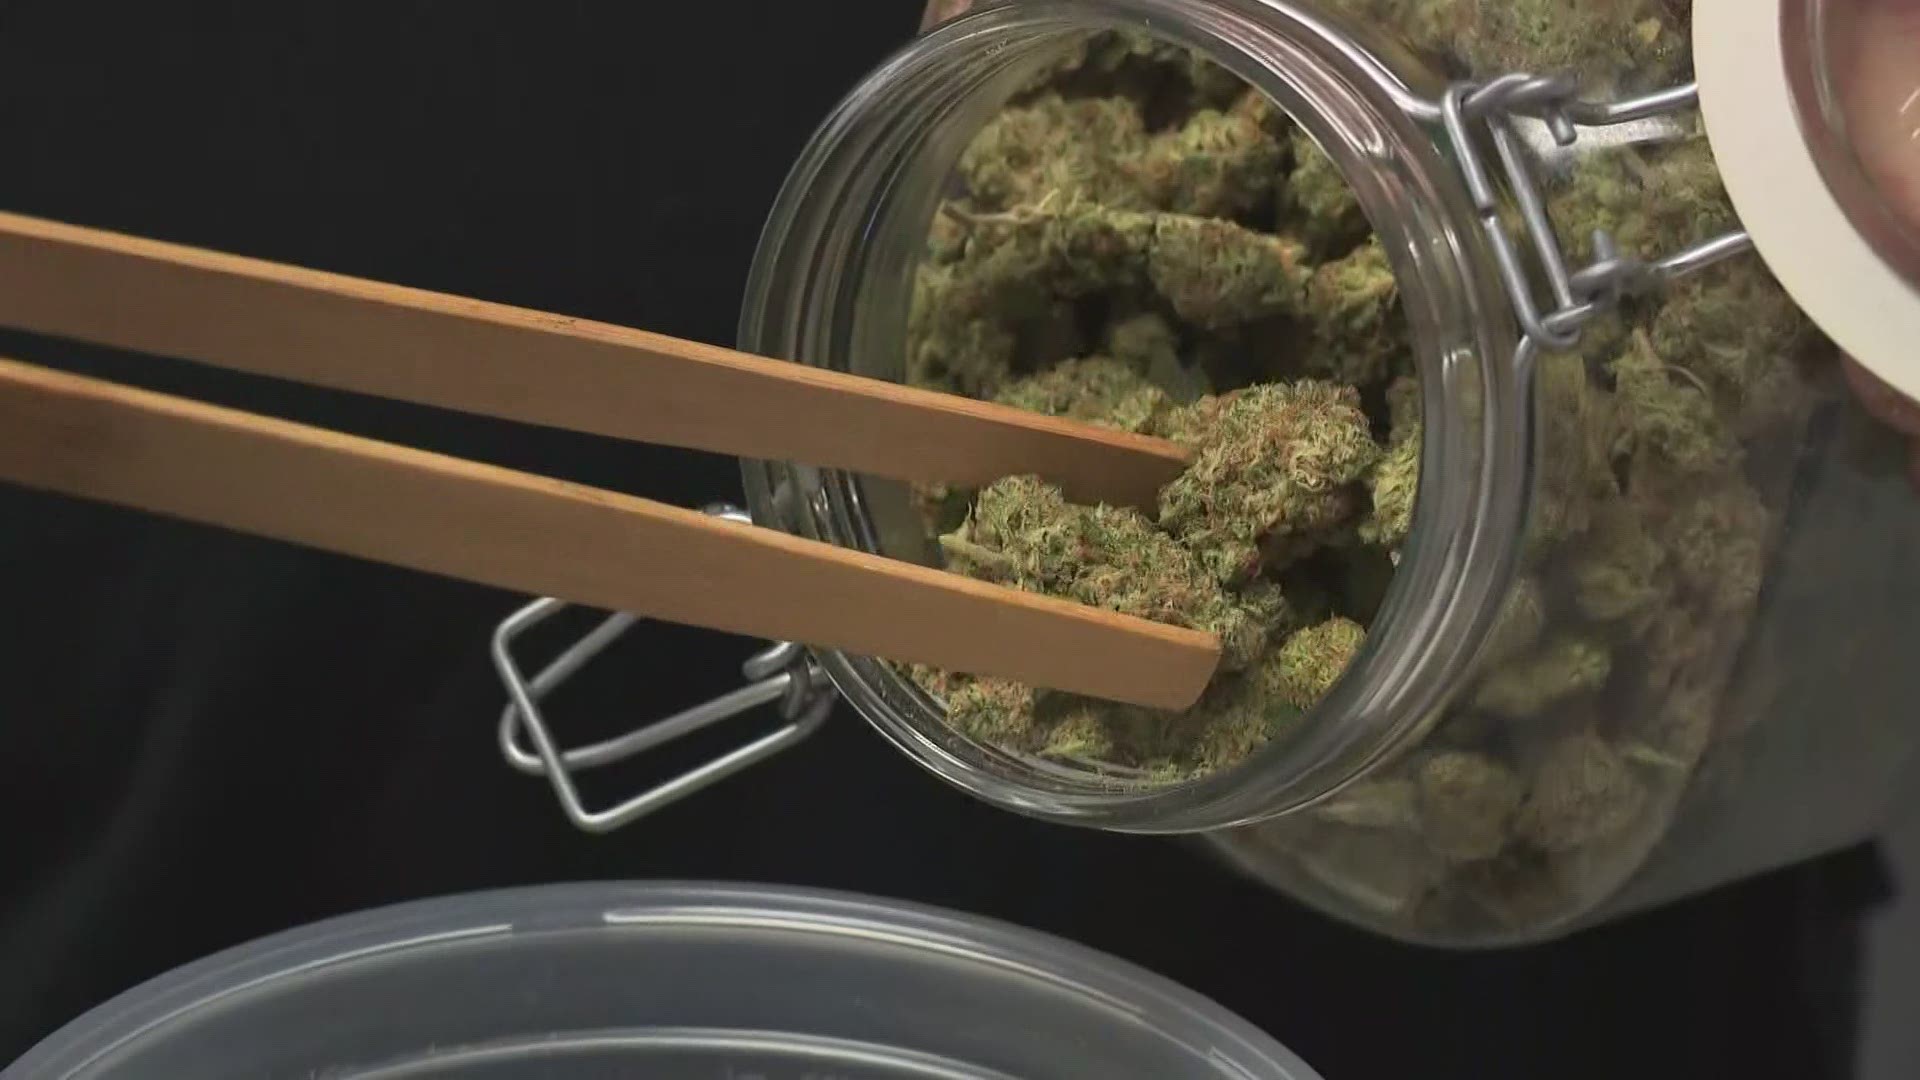 Friday's historic vote comes as more states have legalized recreational marijuana use.